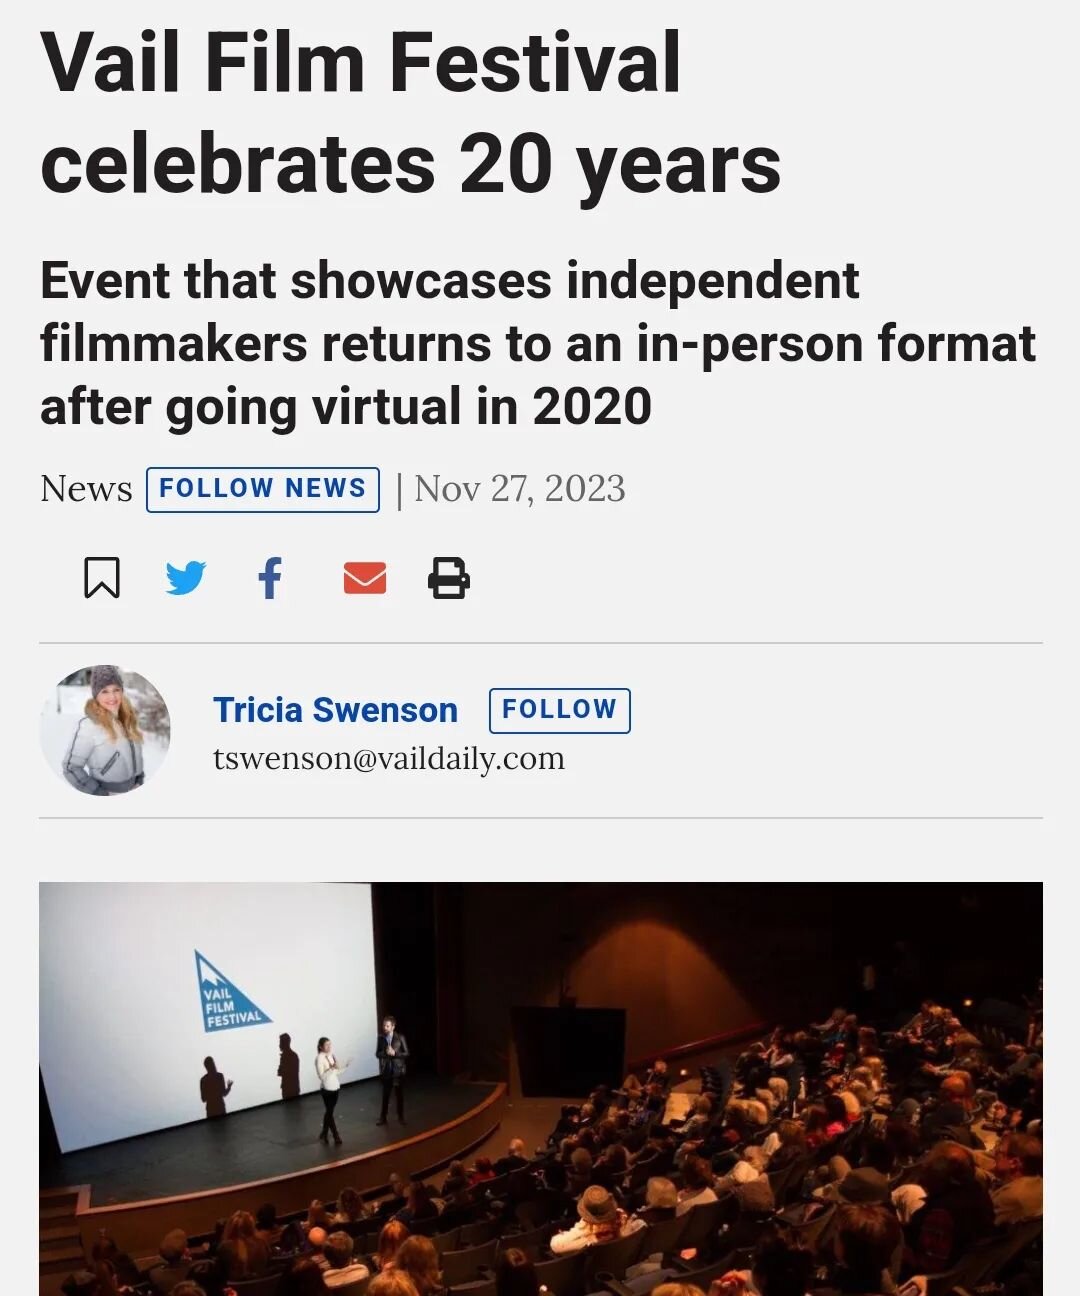 Thank you @vaildaily! We are so thrilled to premiere Another Happy Day at @vailfilmfest. ⛷️

#indiefilm #independentfilm #worldpremiere #vailfilmfestival #vailfilmfestival2023 #femaledirector #femalefilmmaker #womenmakemovies #postpartumdepression #p